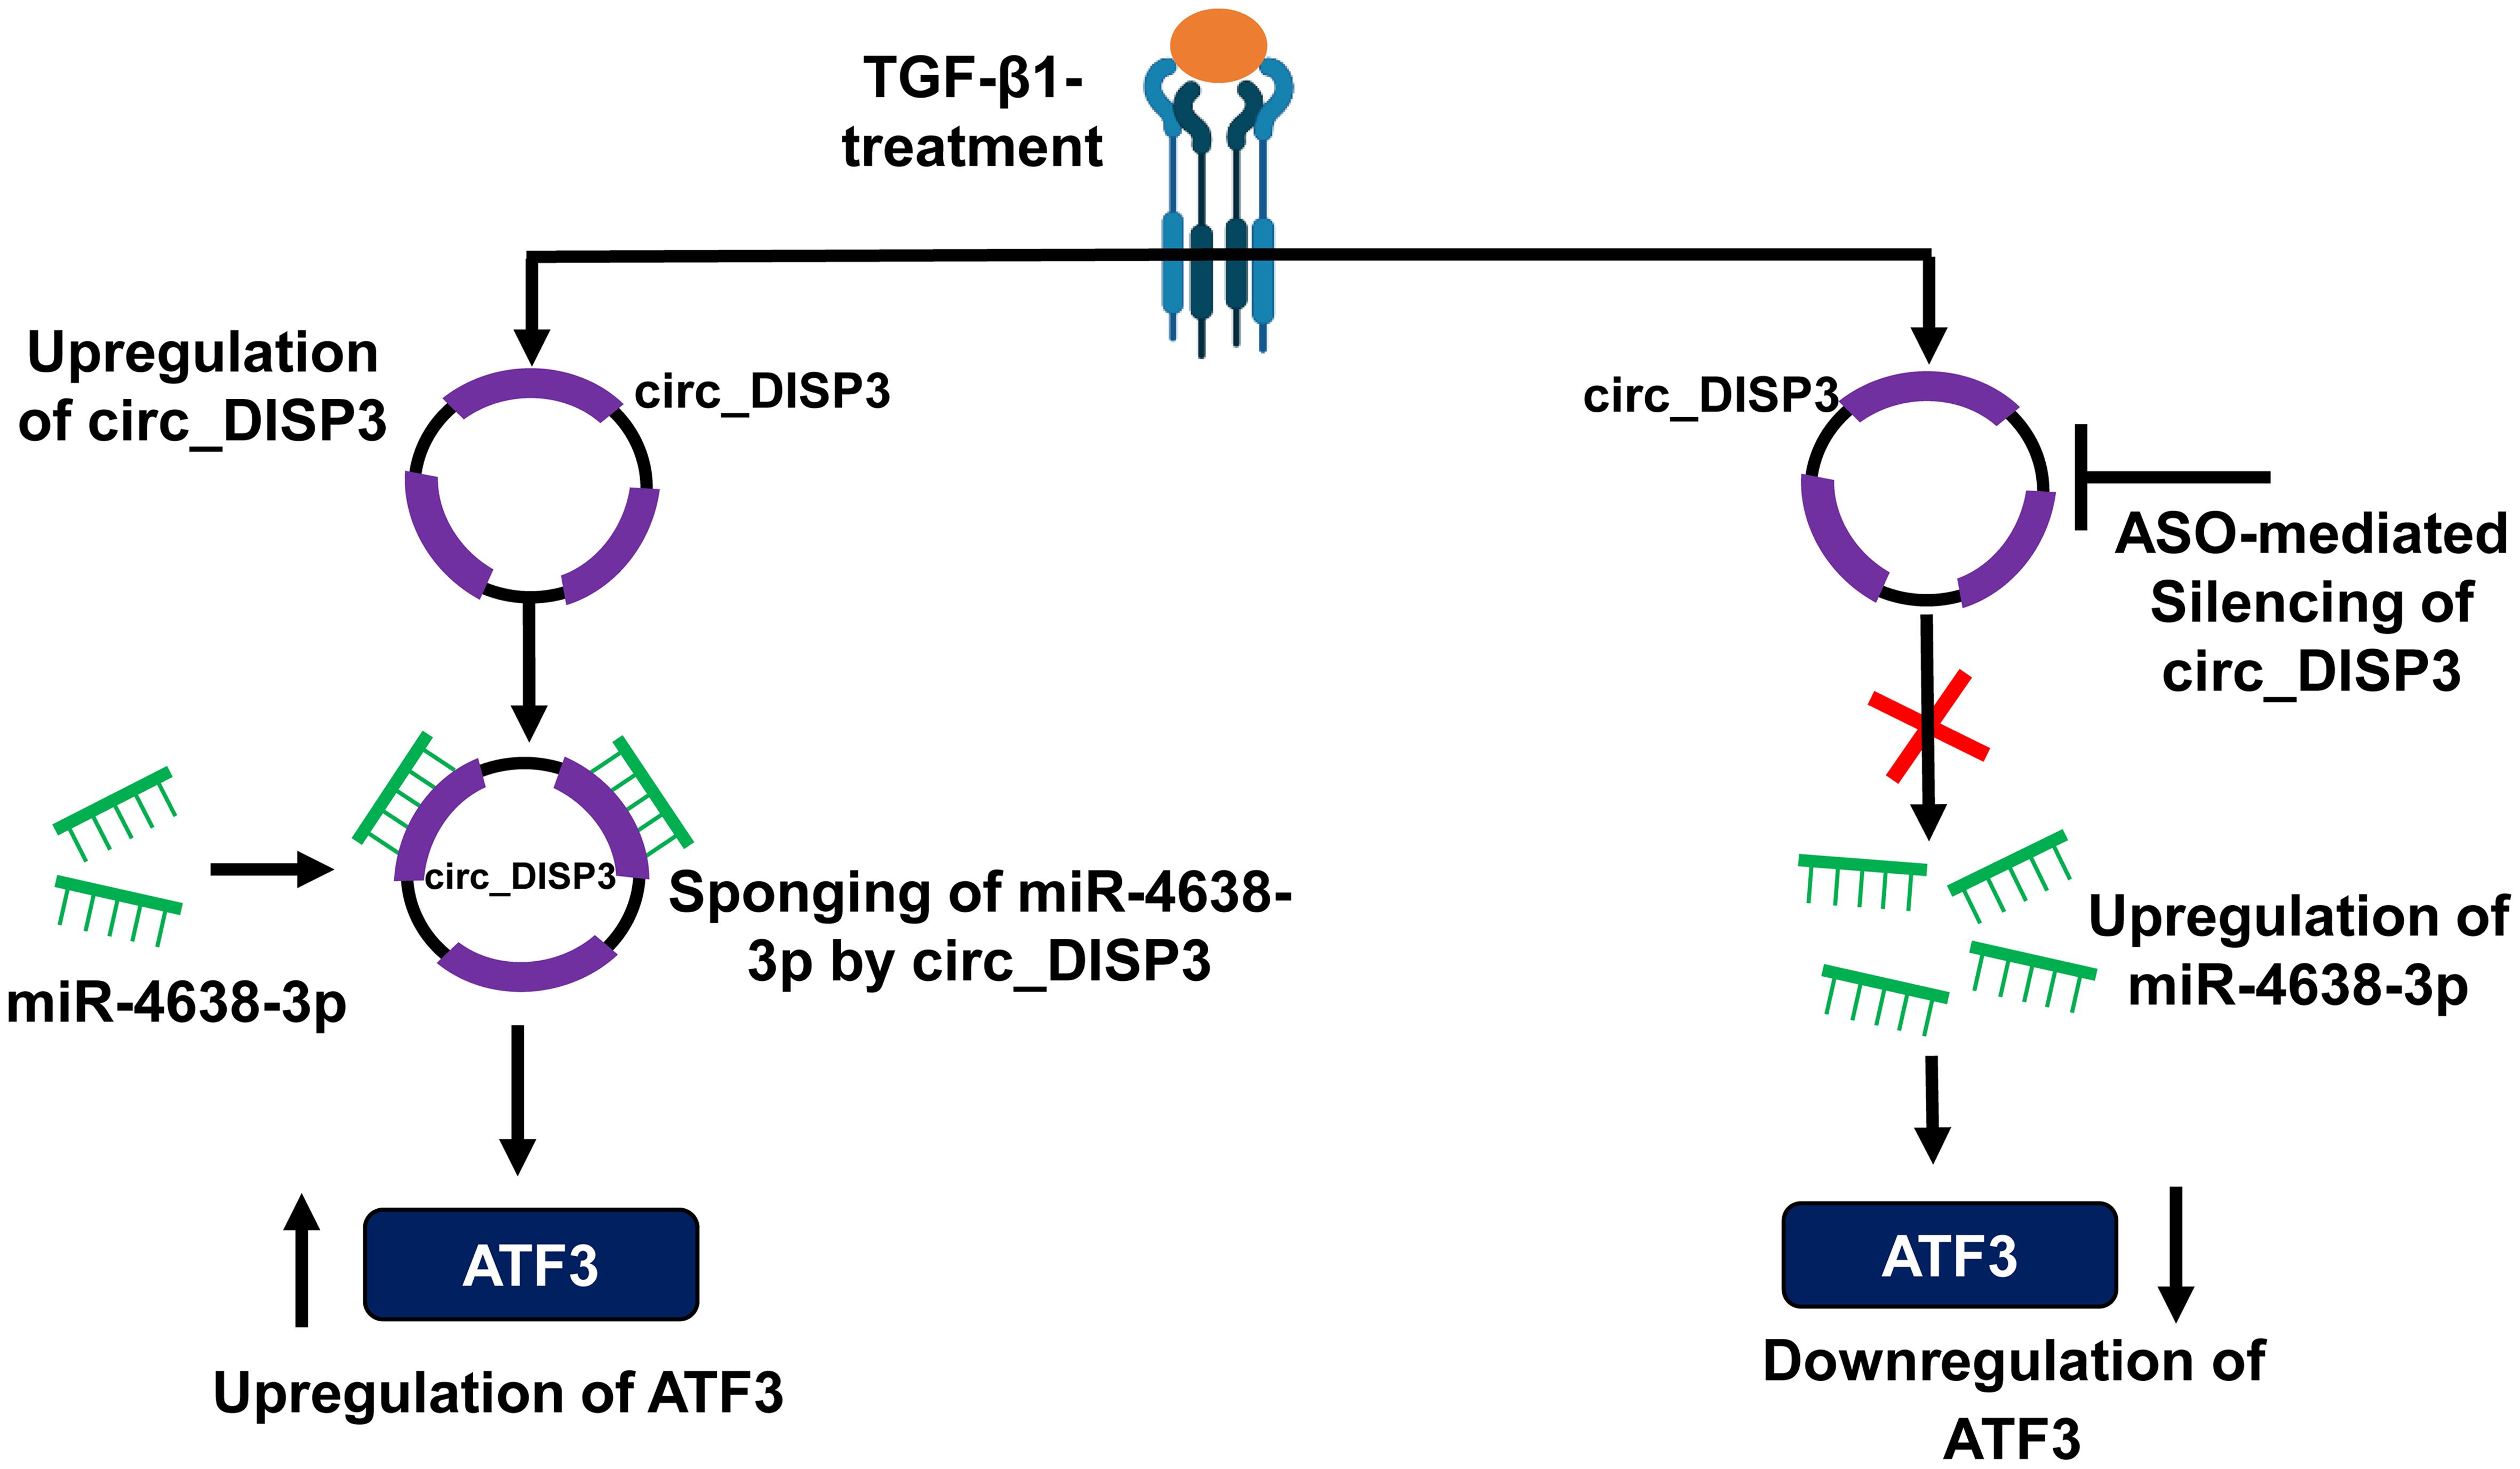 Schematic representation of TGF-β1-mediated ATF3 expression in hBC cells.